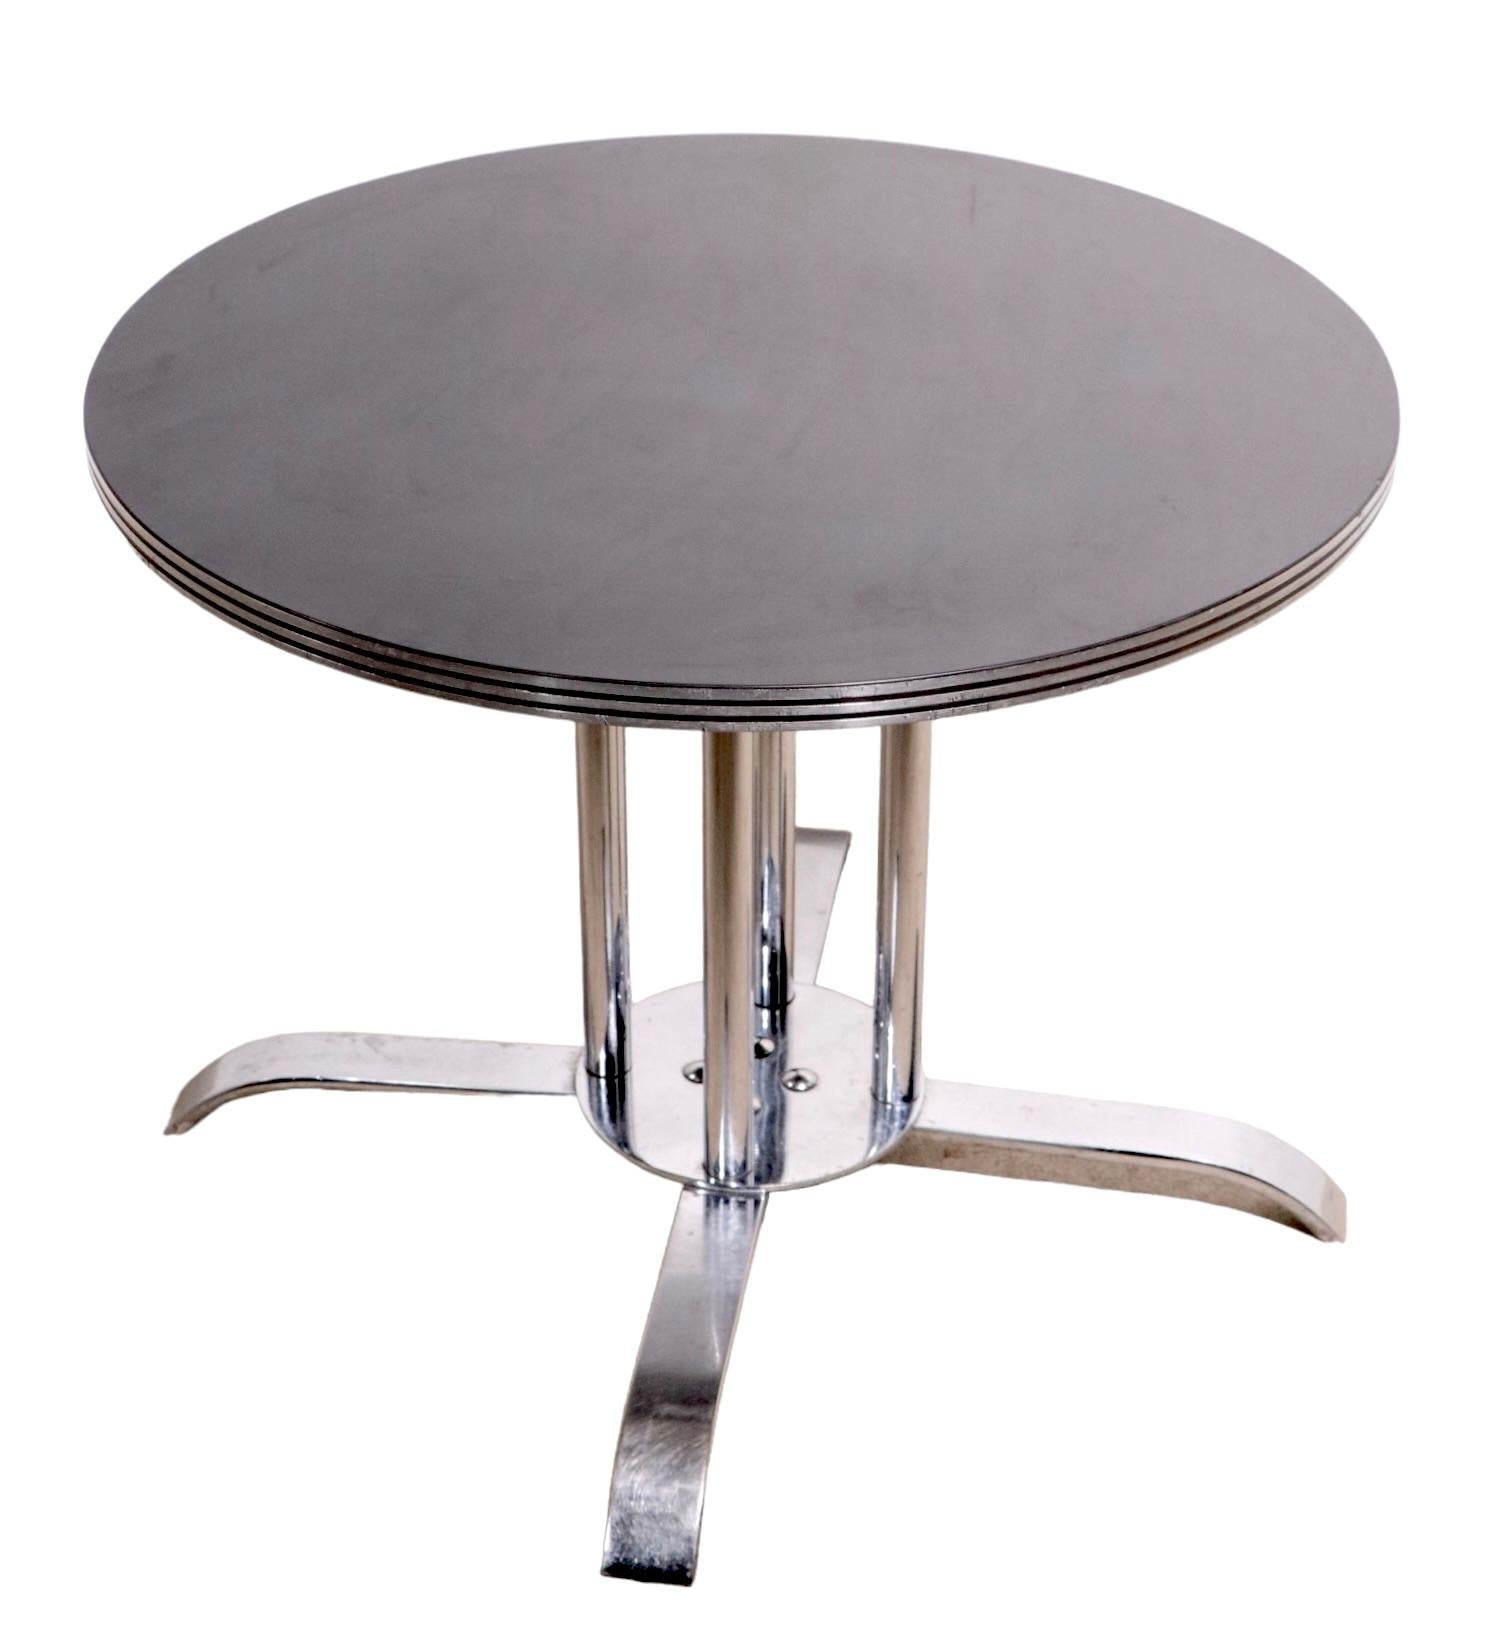 Mid-20th Century Art Deco Machine Age Chrome Table by McKay Craft Furniture Made in USA c 1930's For Sale